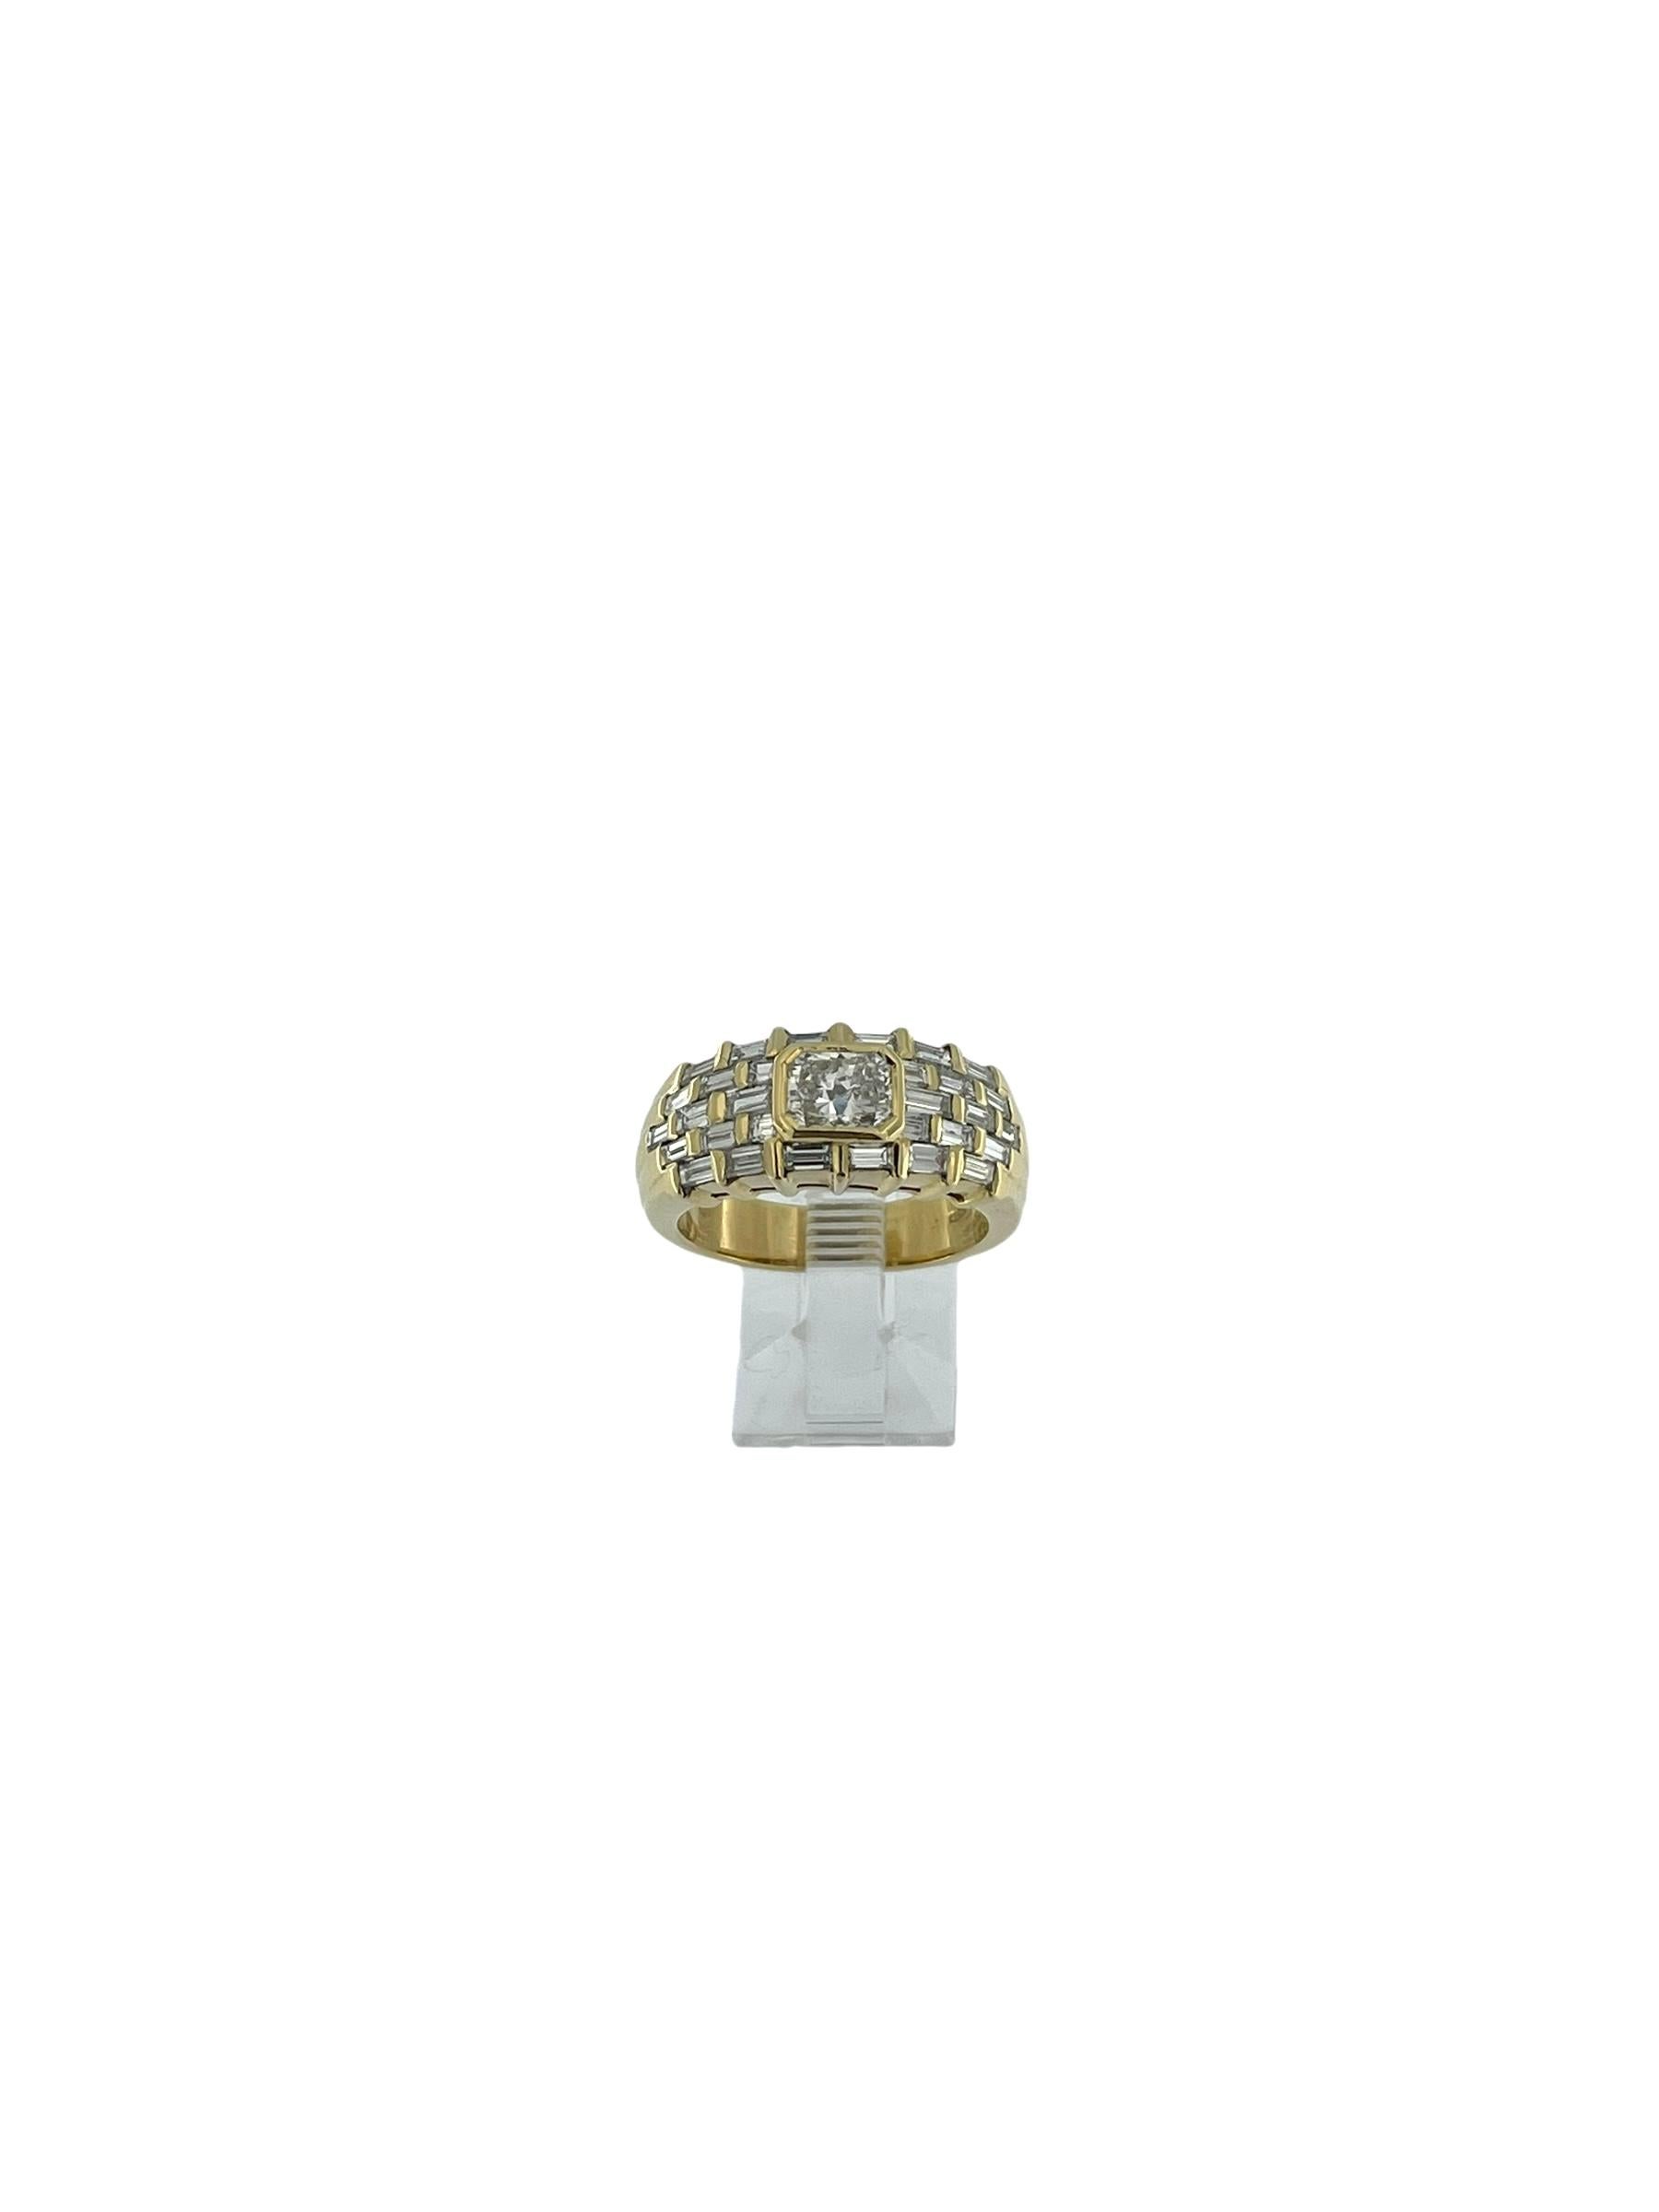 Modern HRD Certified Yellow Gold Cocktail Ring 1.90ct Diamonds For Sale